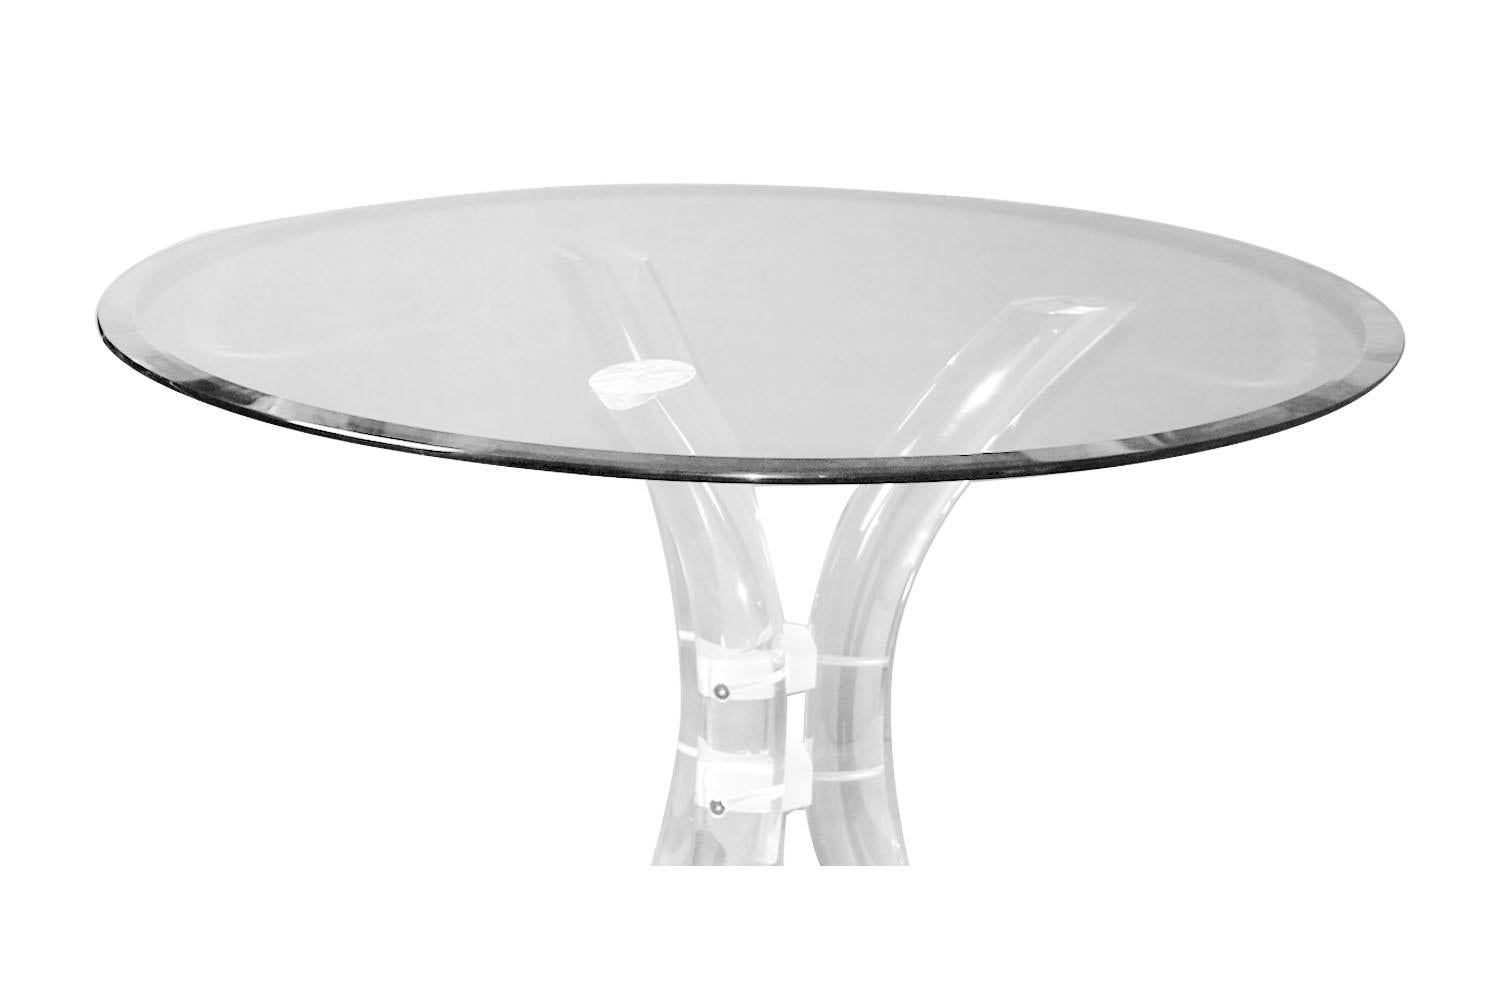 Late 20th Century Charles Hollis Jones Style Midcentury Glass Lucite Dining Table by Hill Mfg.